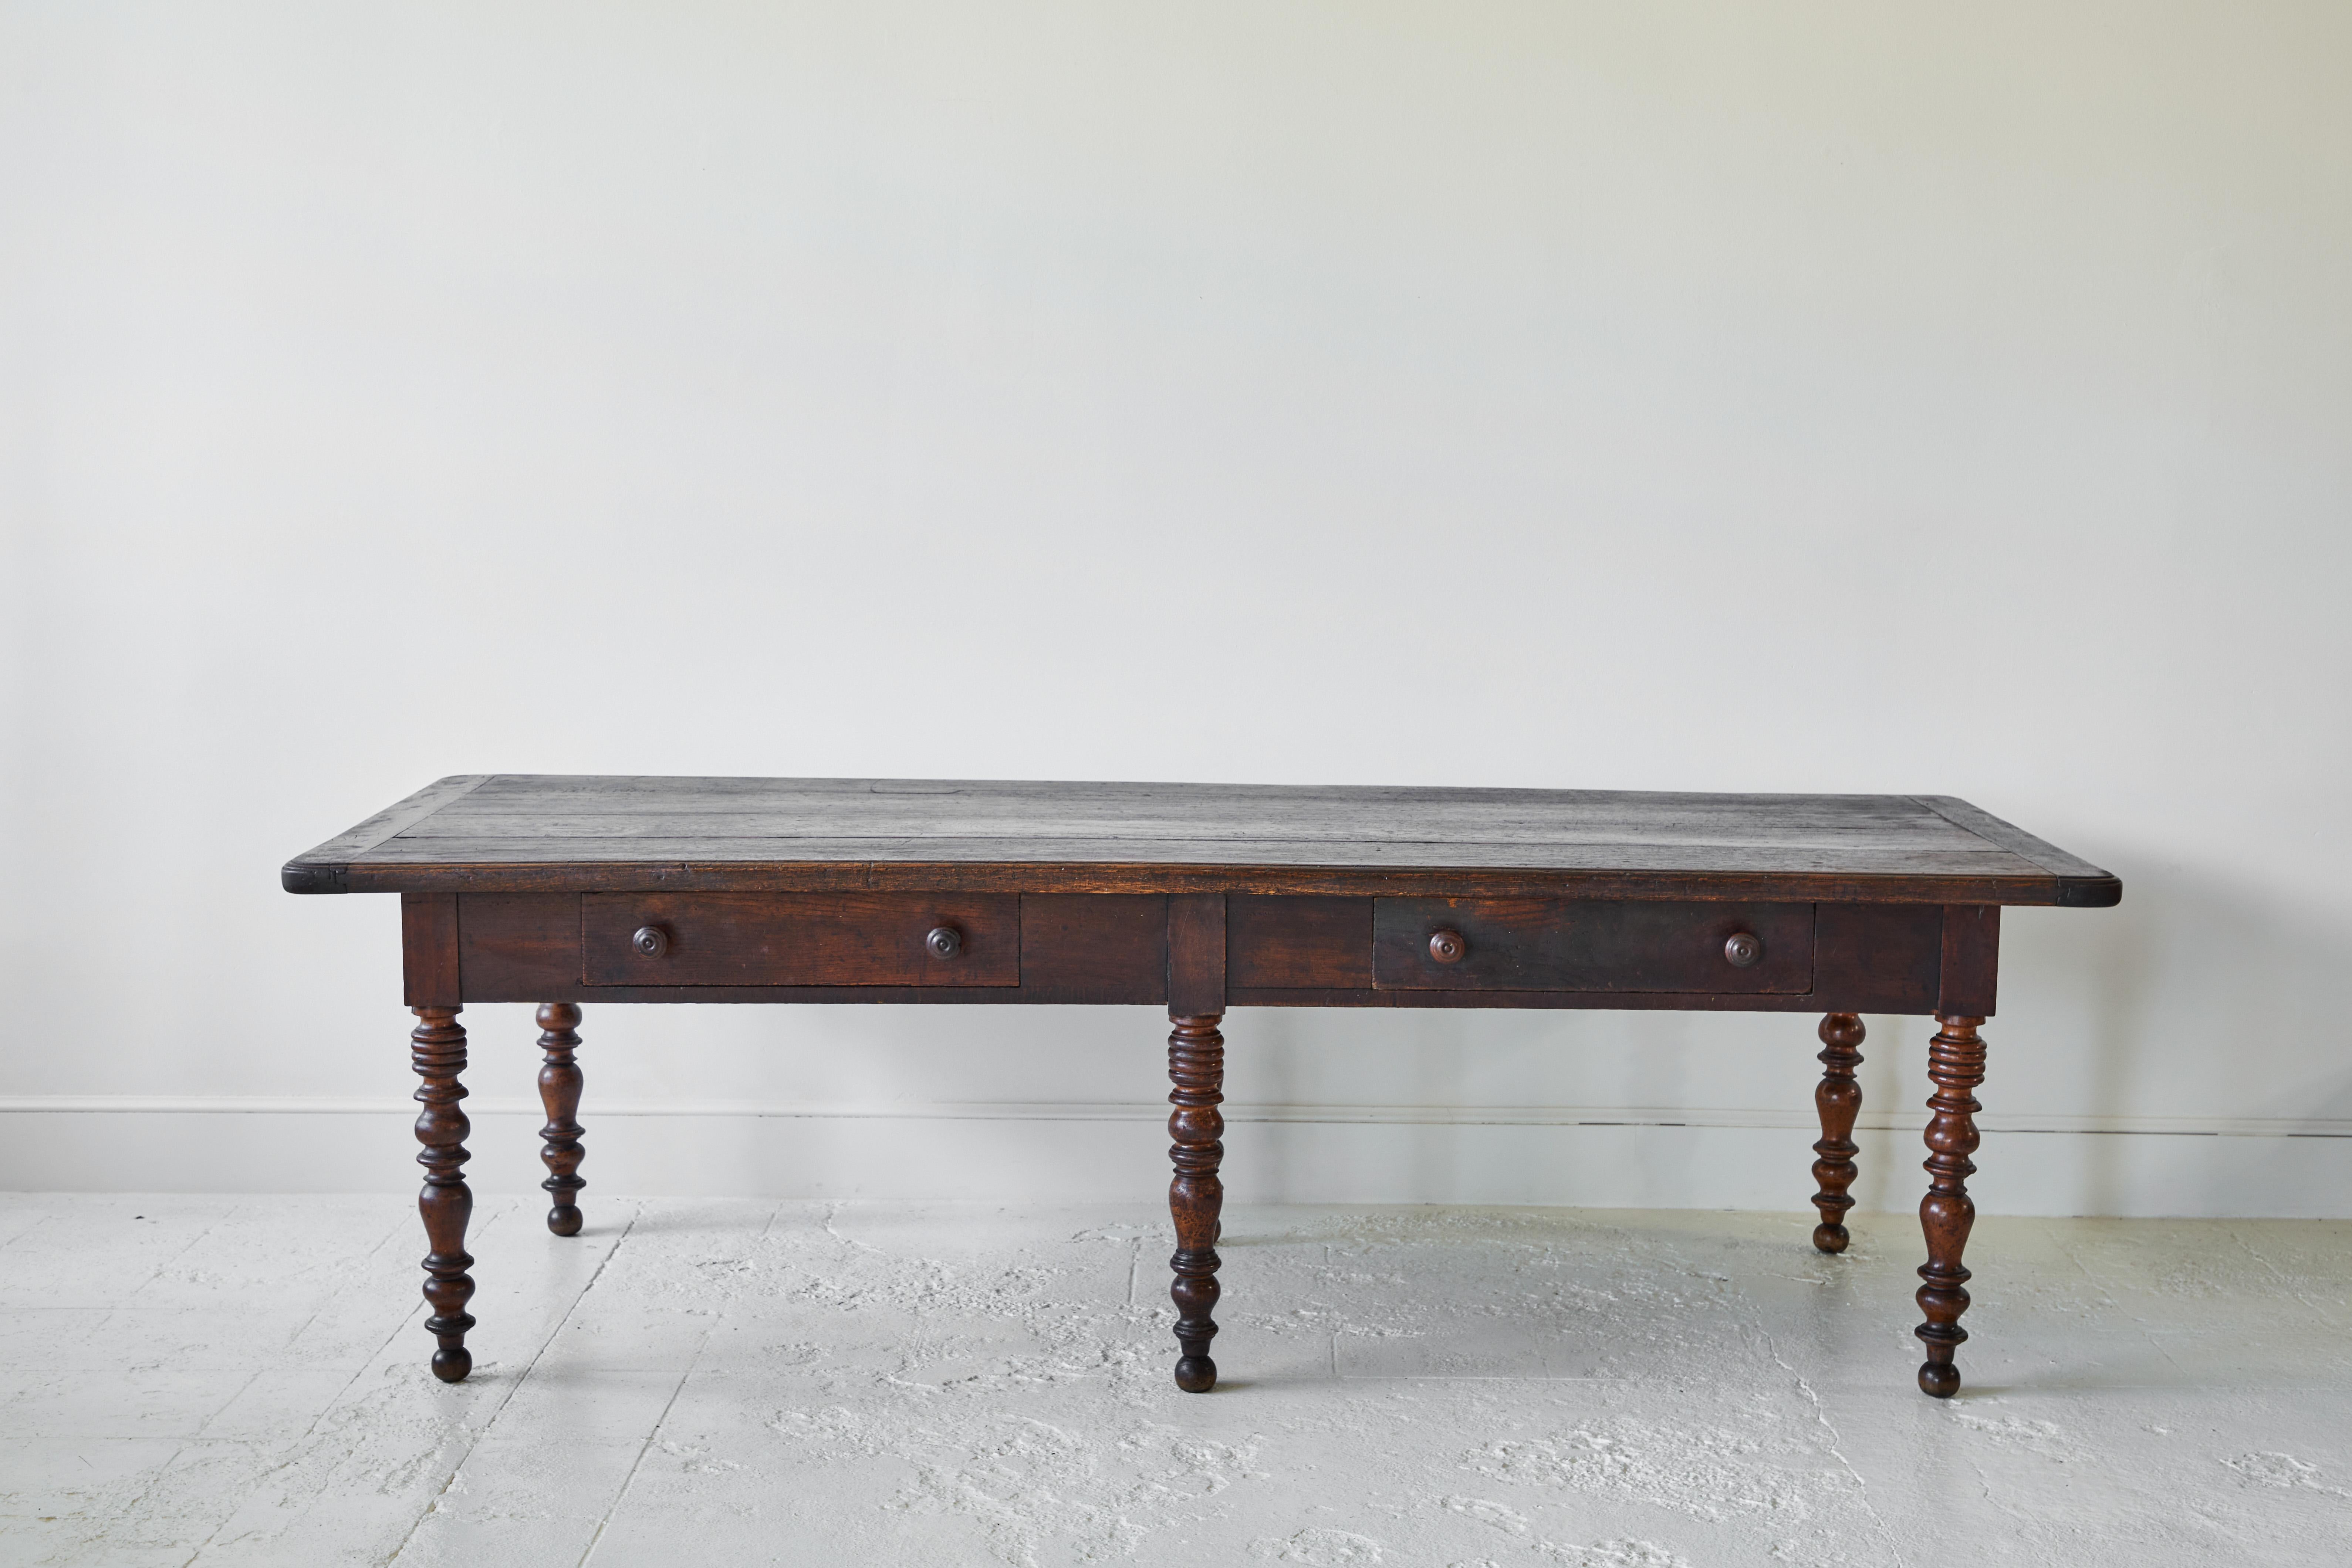 Beautifully crafted French table with six turned legs and two drawers on the side, the wood is beautifully stained.